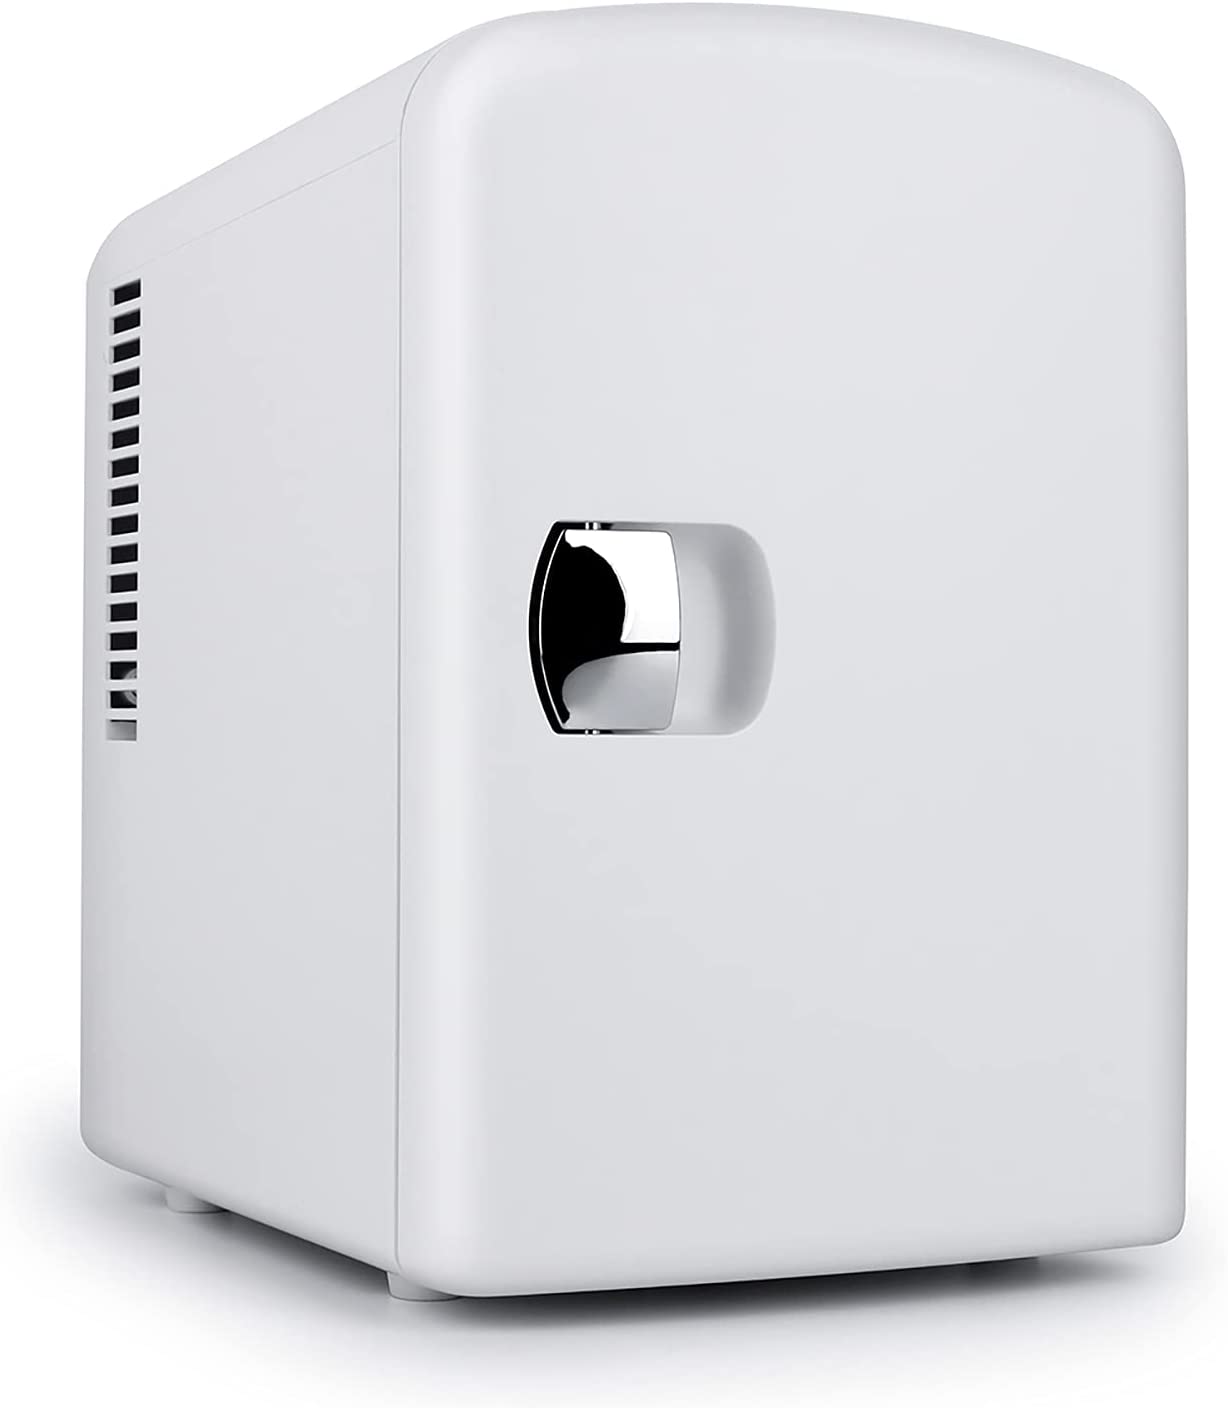 Living Enrichment Mini-Fridge Chilling And Warming, Portable Compact Refrigerator AC/DC Power, 4L 6 Cans Capacity, For Skincare, Foods, Medications, Milk, Home, And Travel White